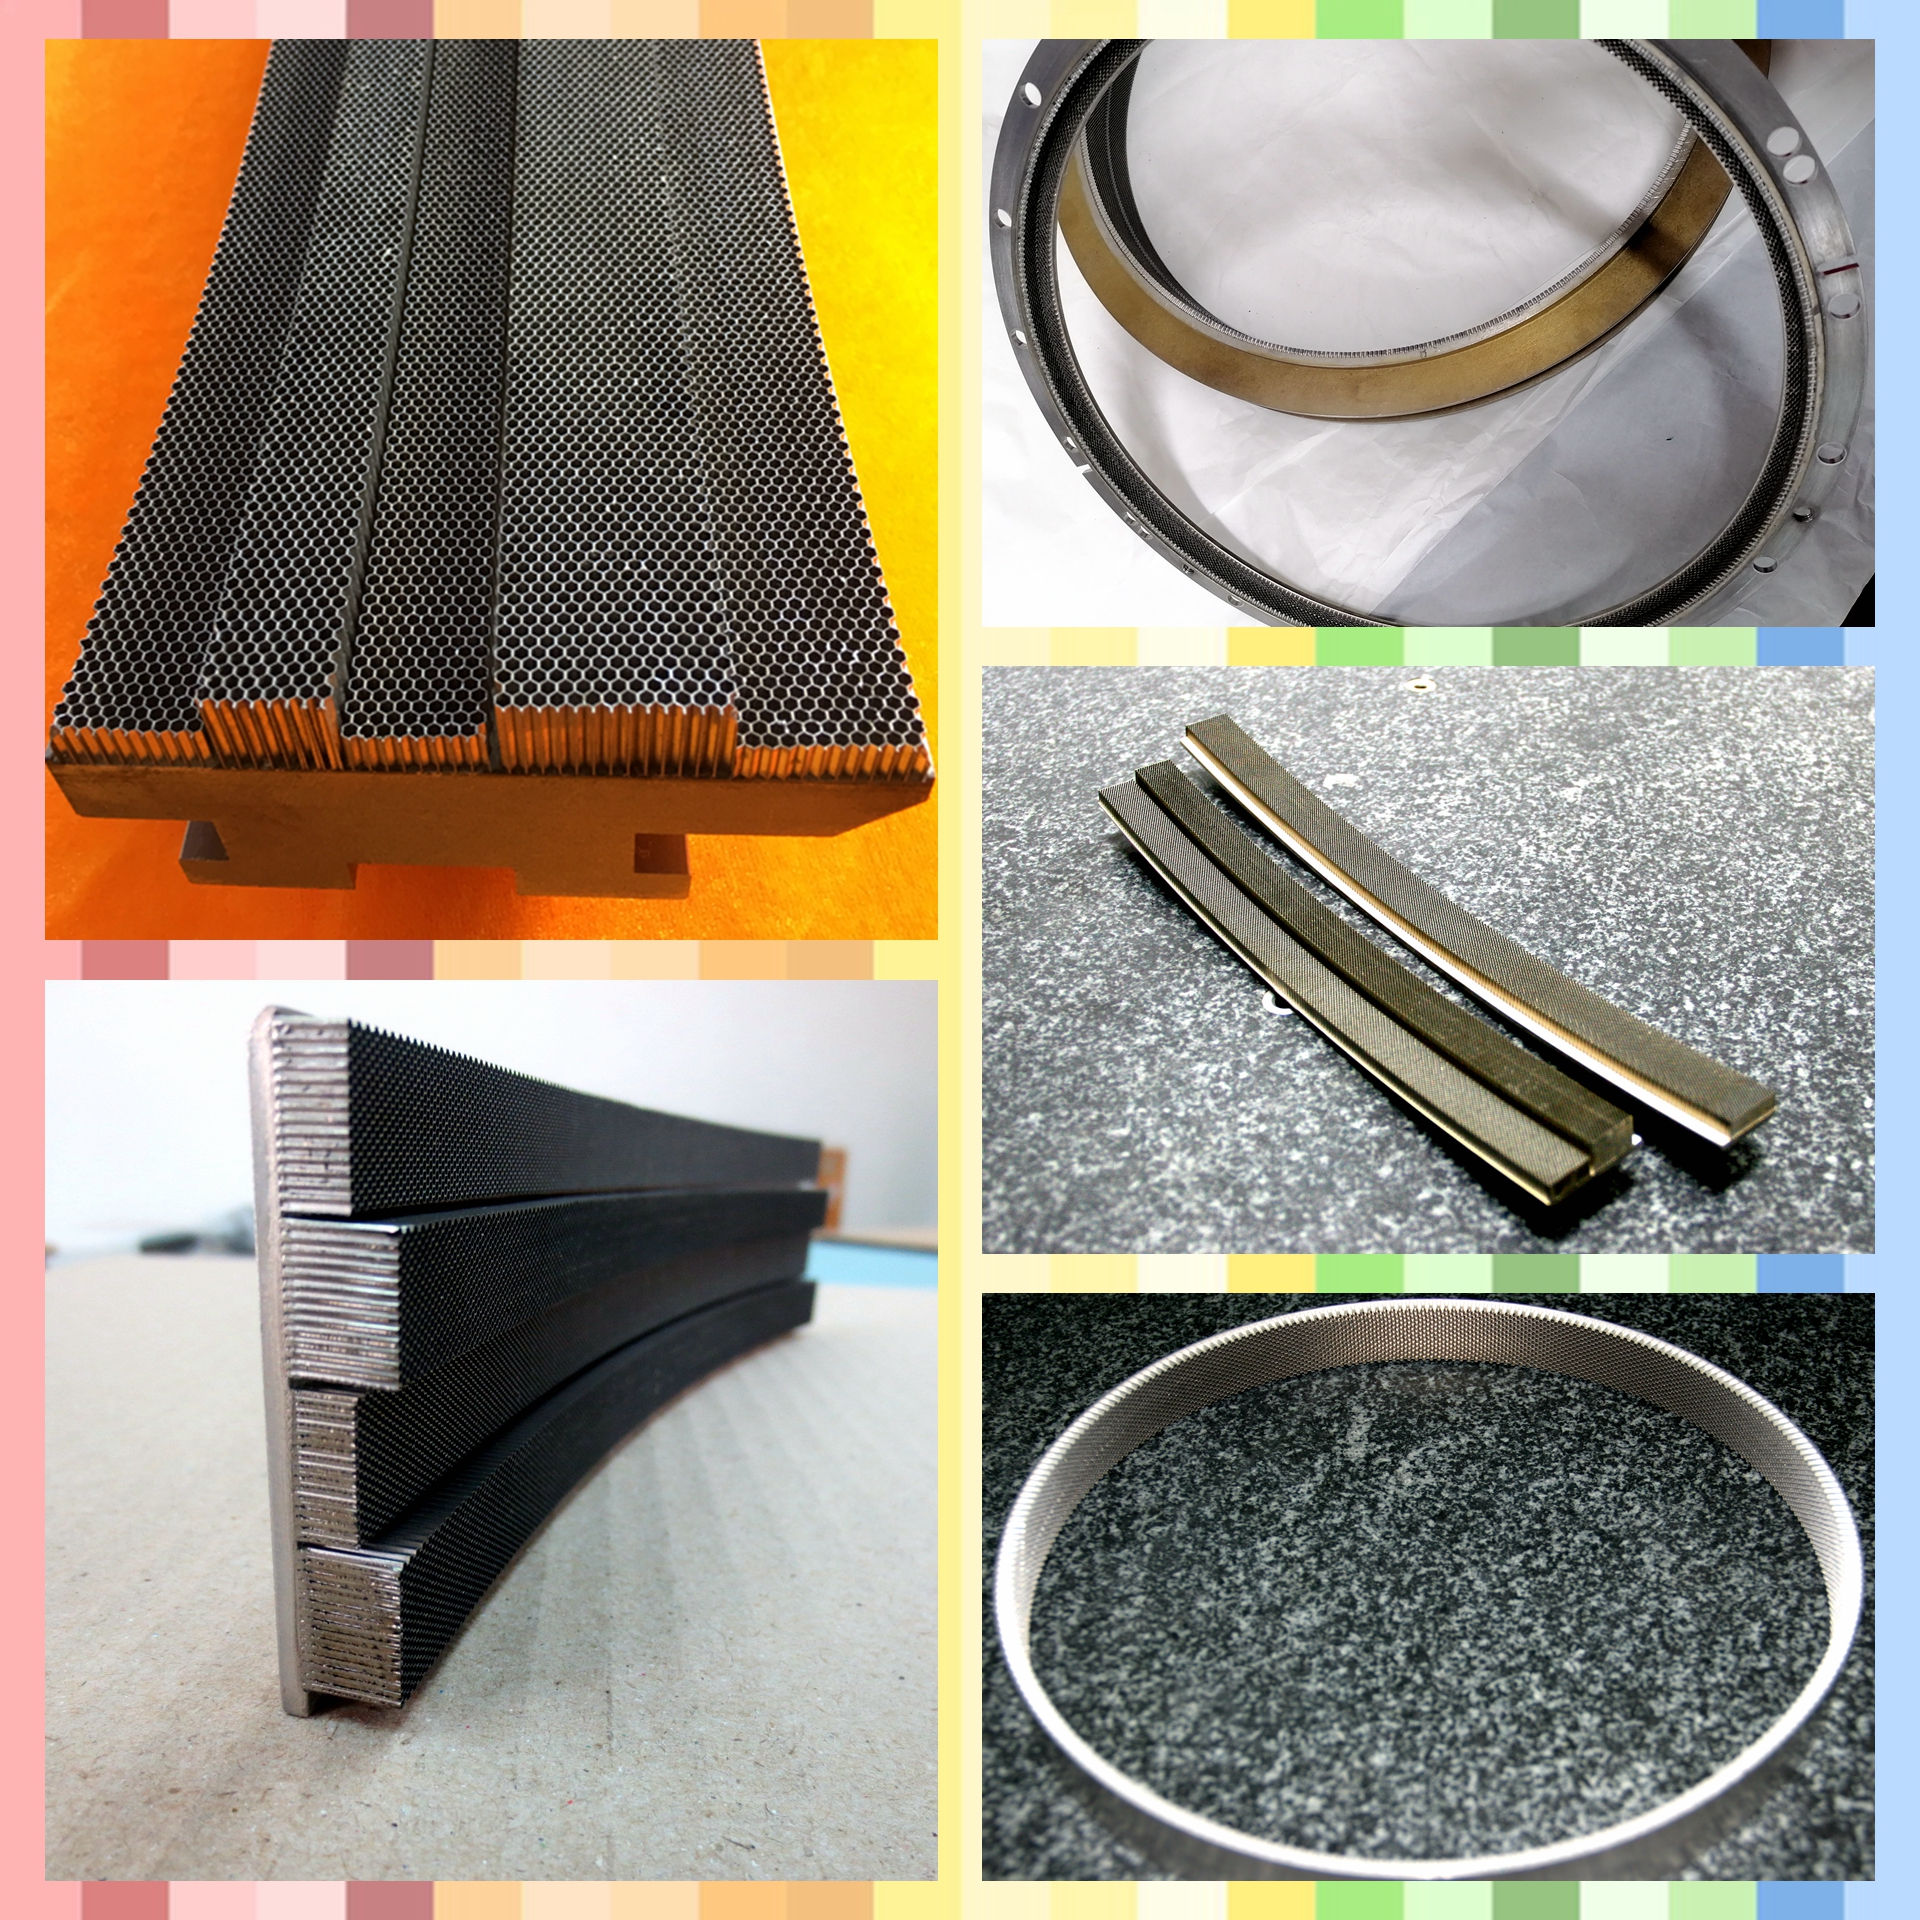 Product pictures of honeycomb seal